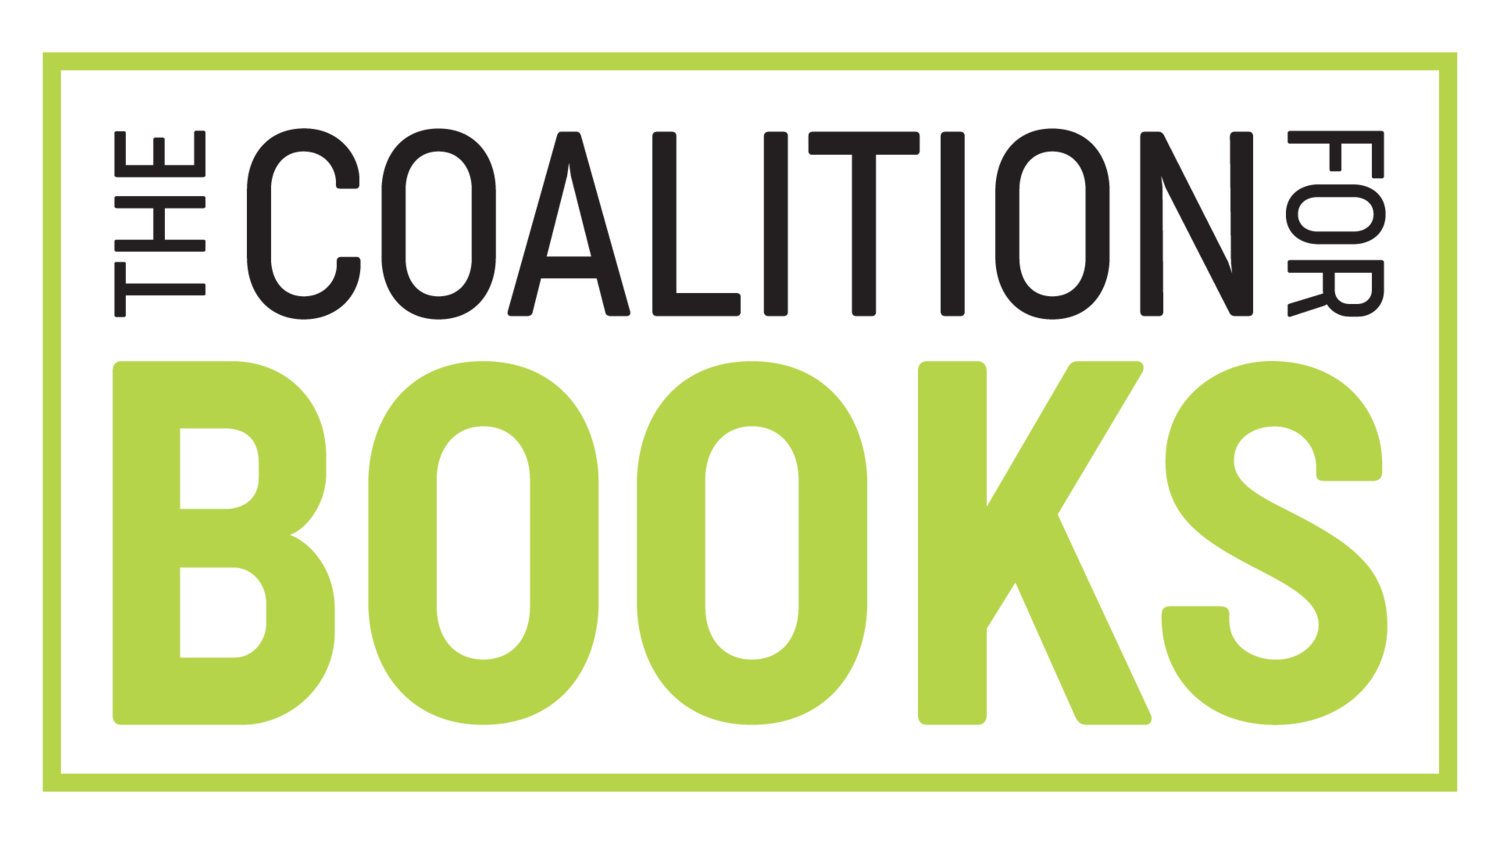 Coalition for Books